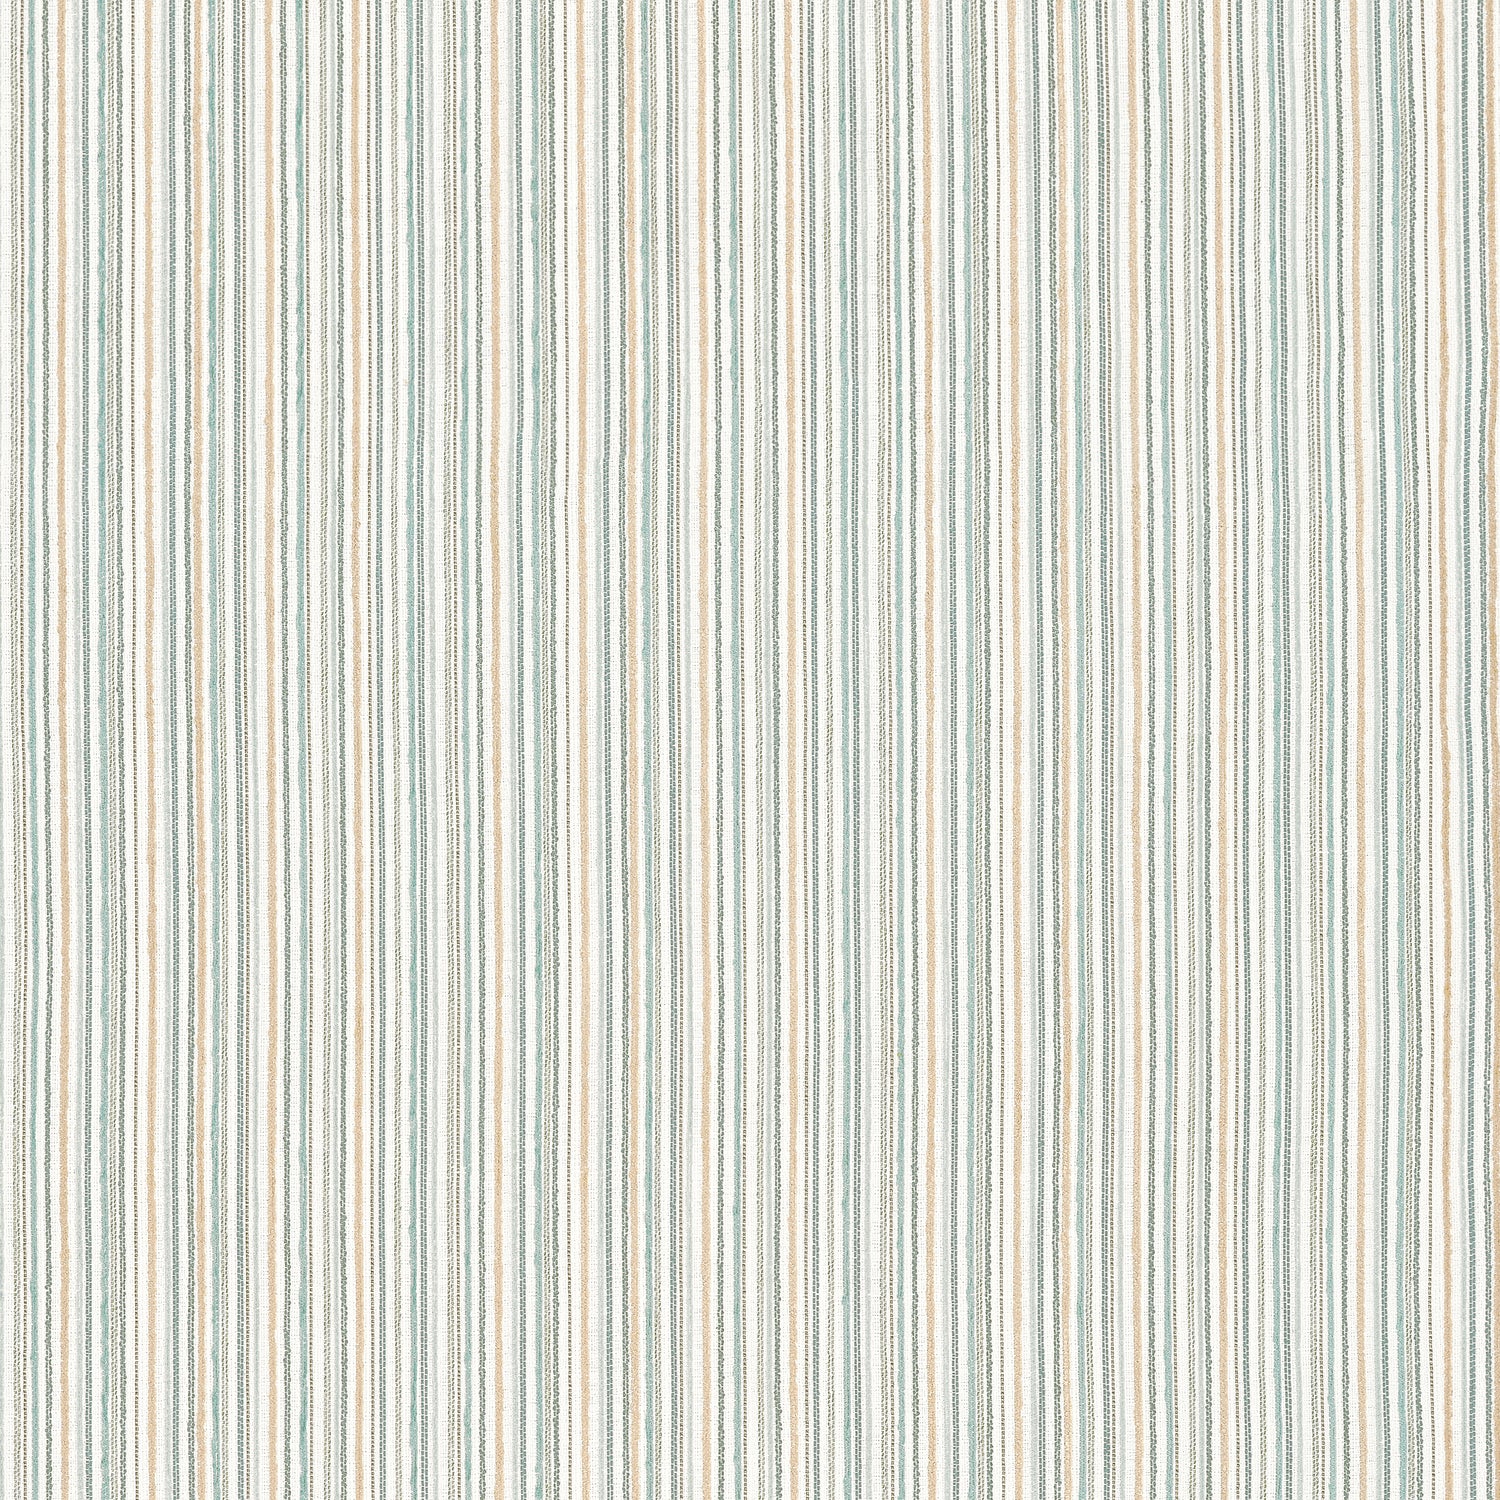 Ernie Stripe fabric in mineral color - pattern number W81943 - by Thibaut in the Companions collection